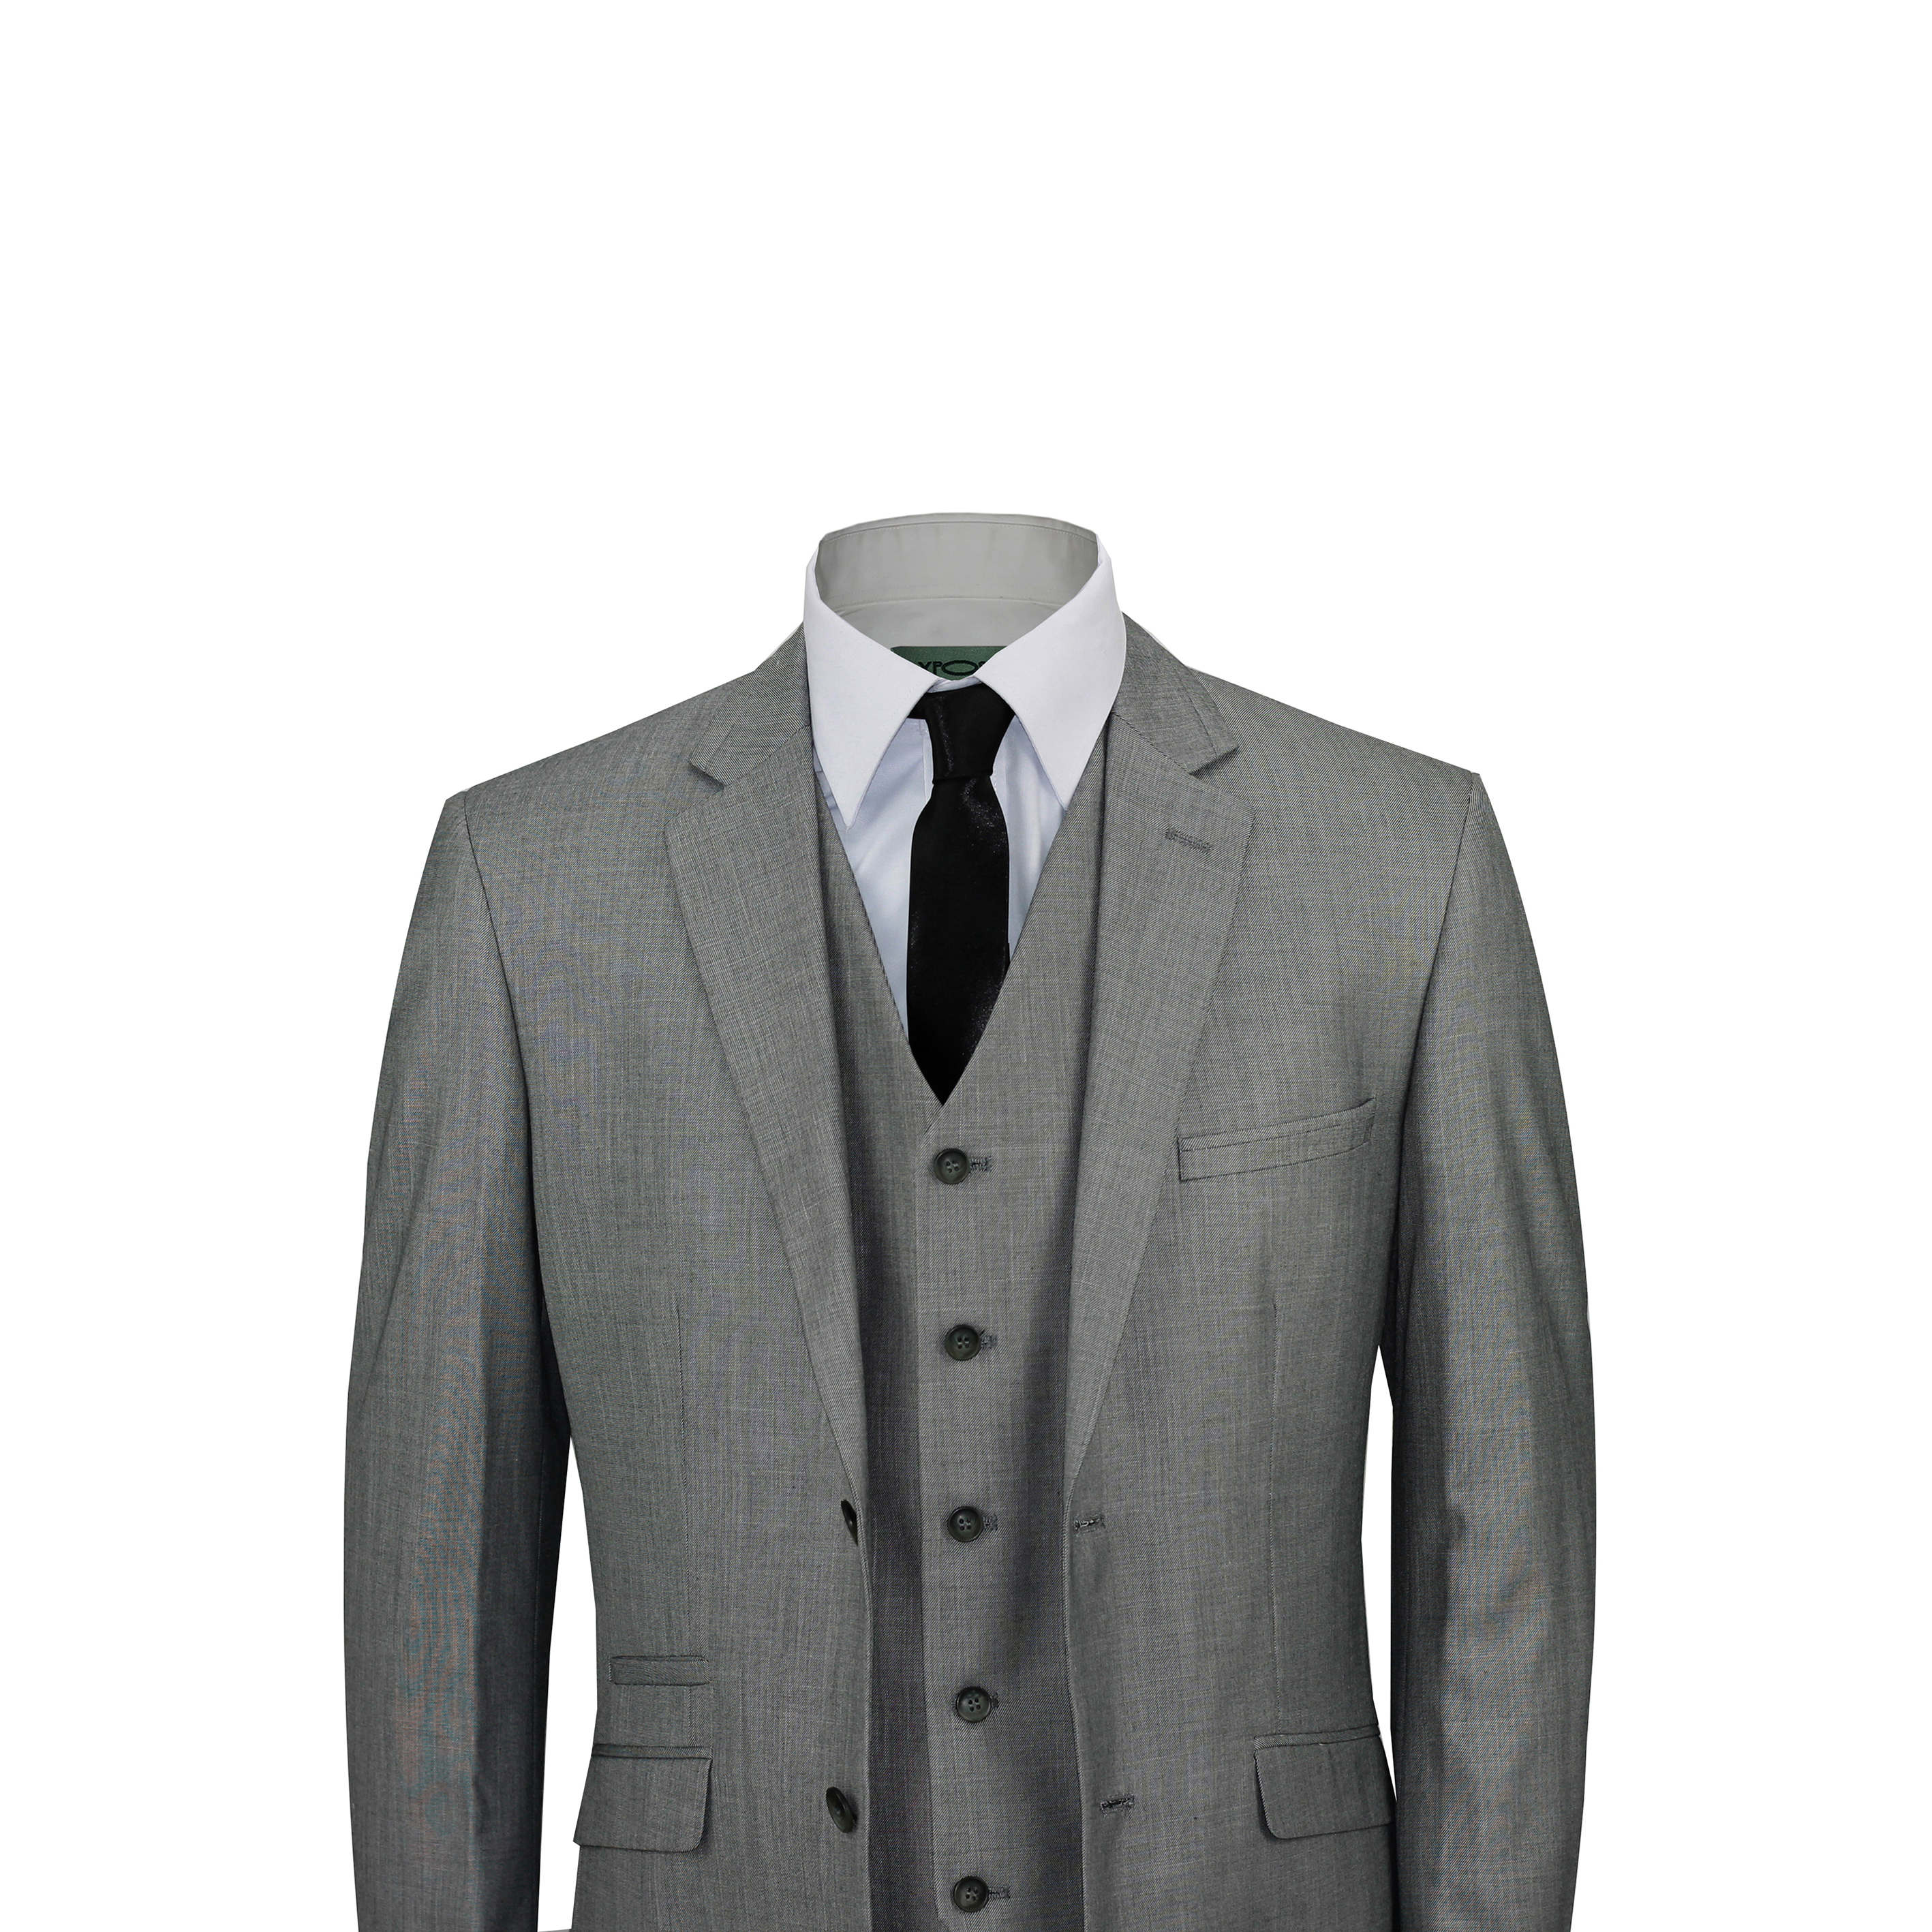 Mens Plain Grey 3 Piece Formal Tailored Fit Casual Smart Suit Work Wedding Prom